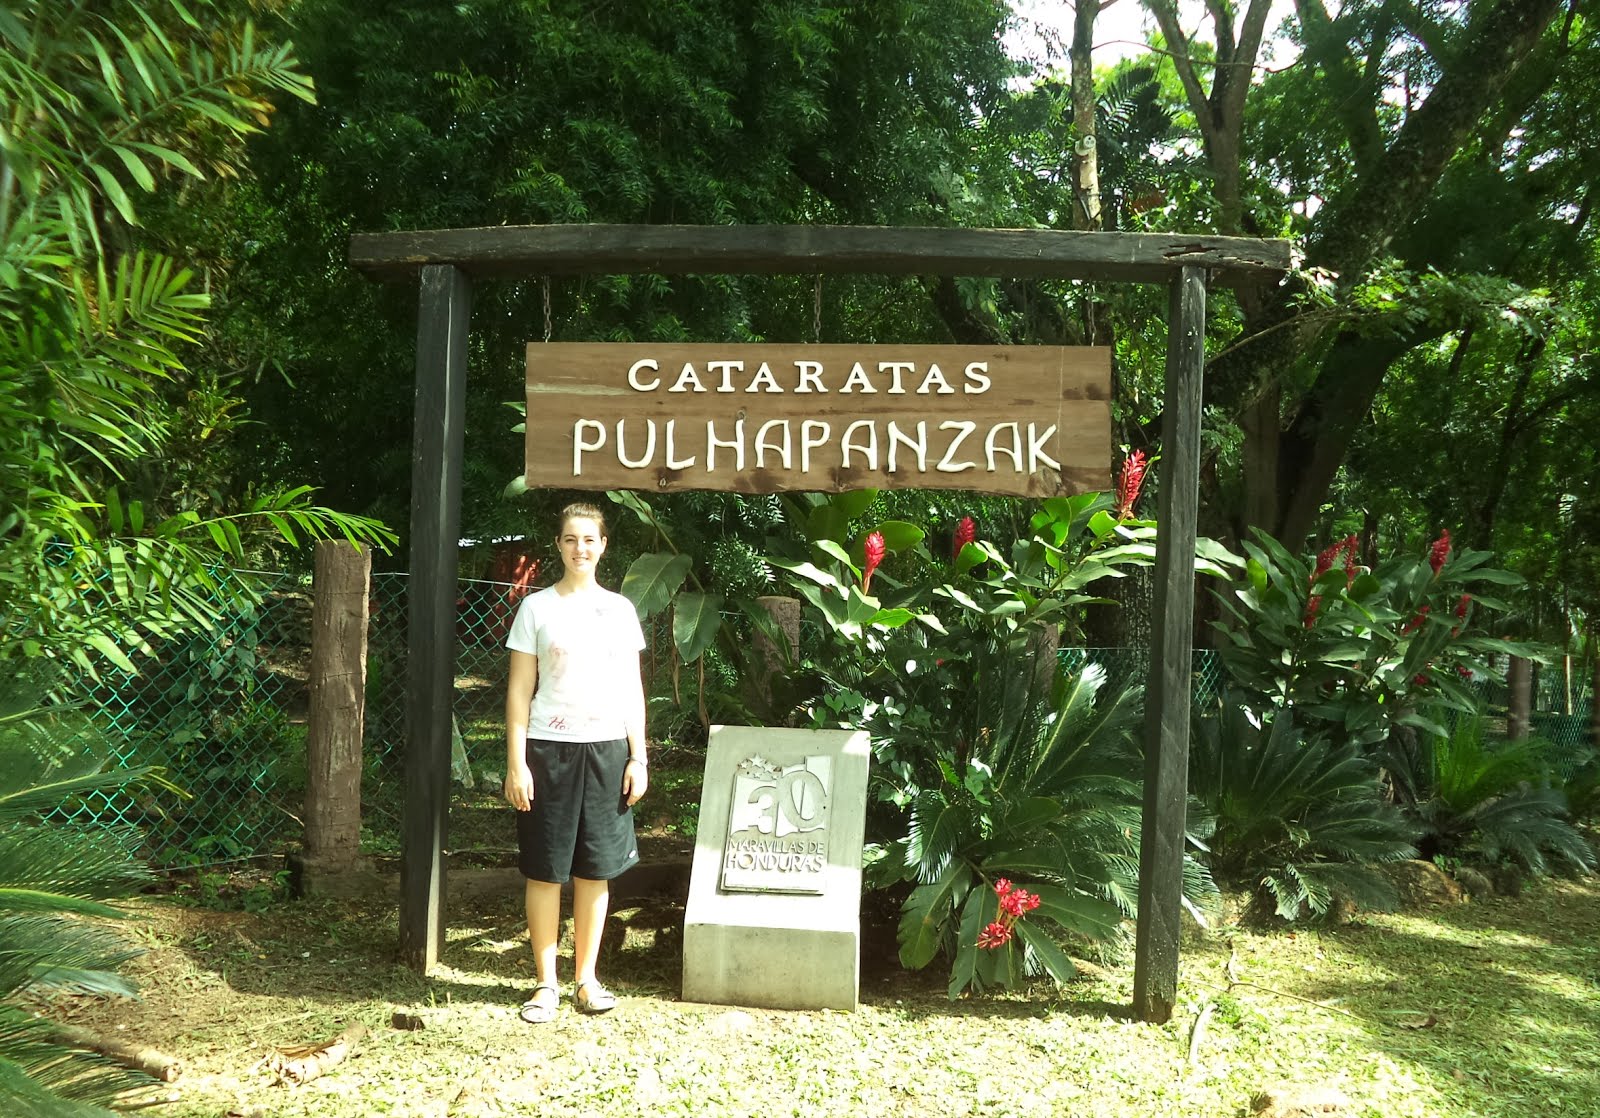 Pulhapanzak on Pday!